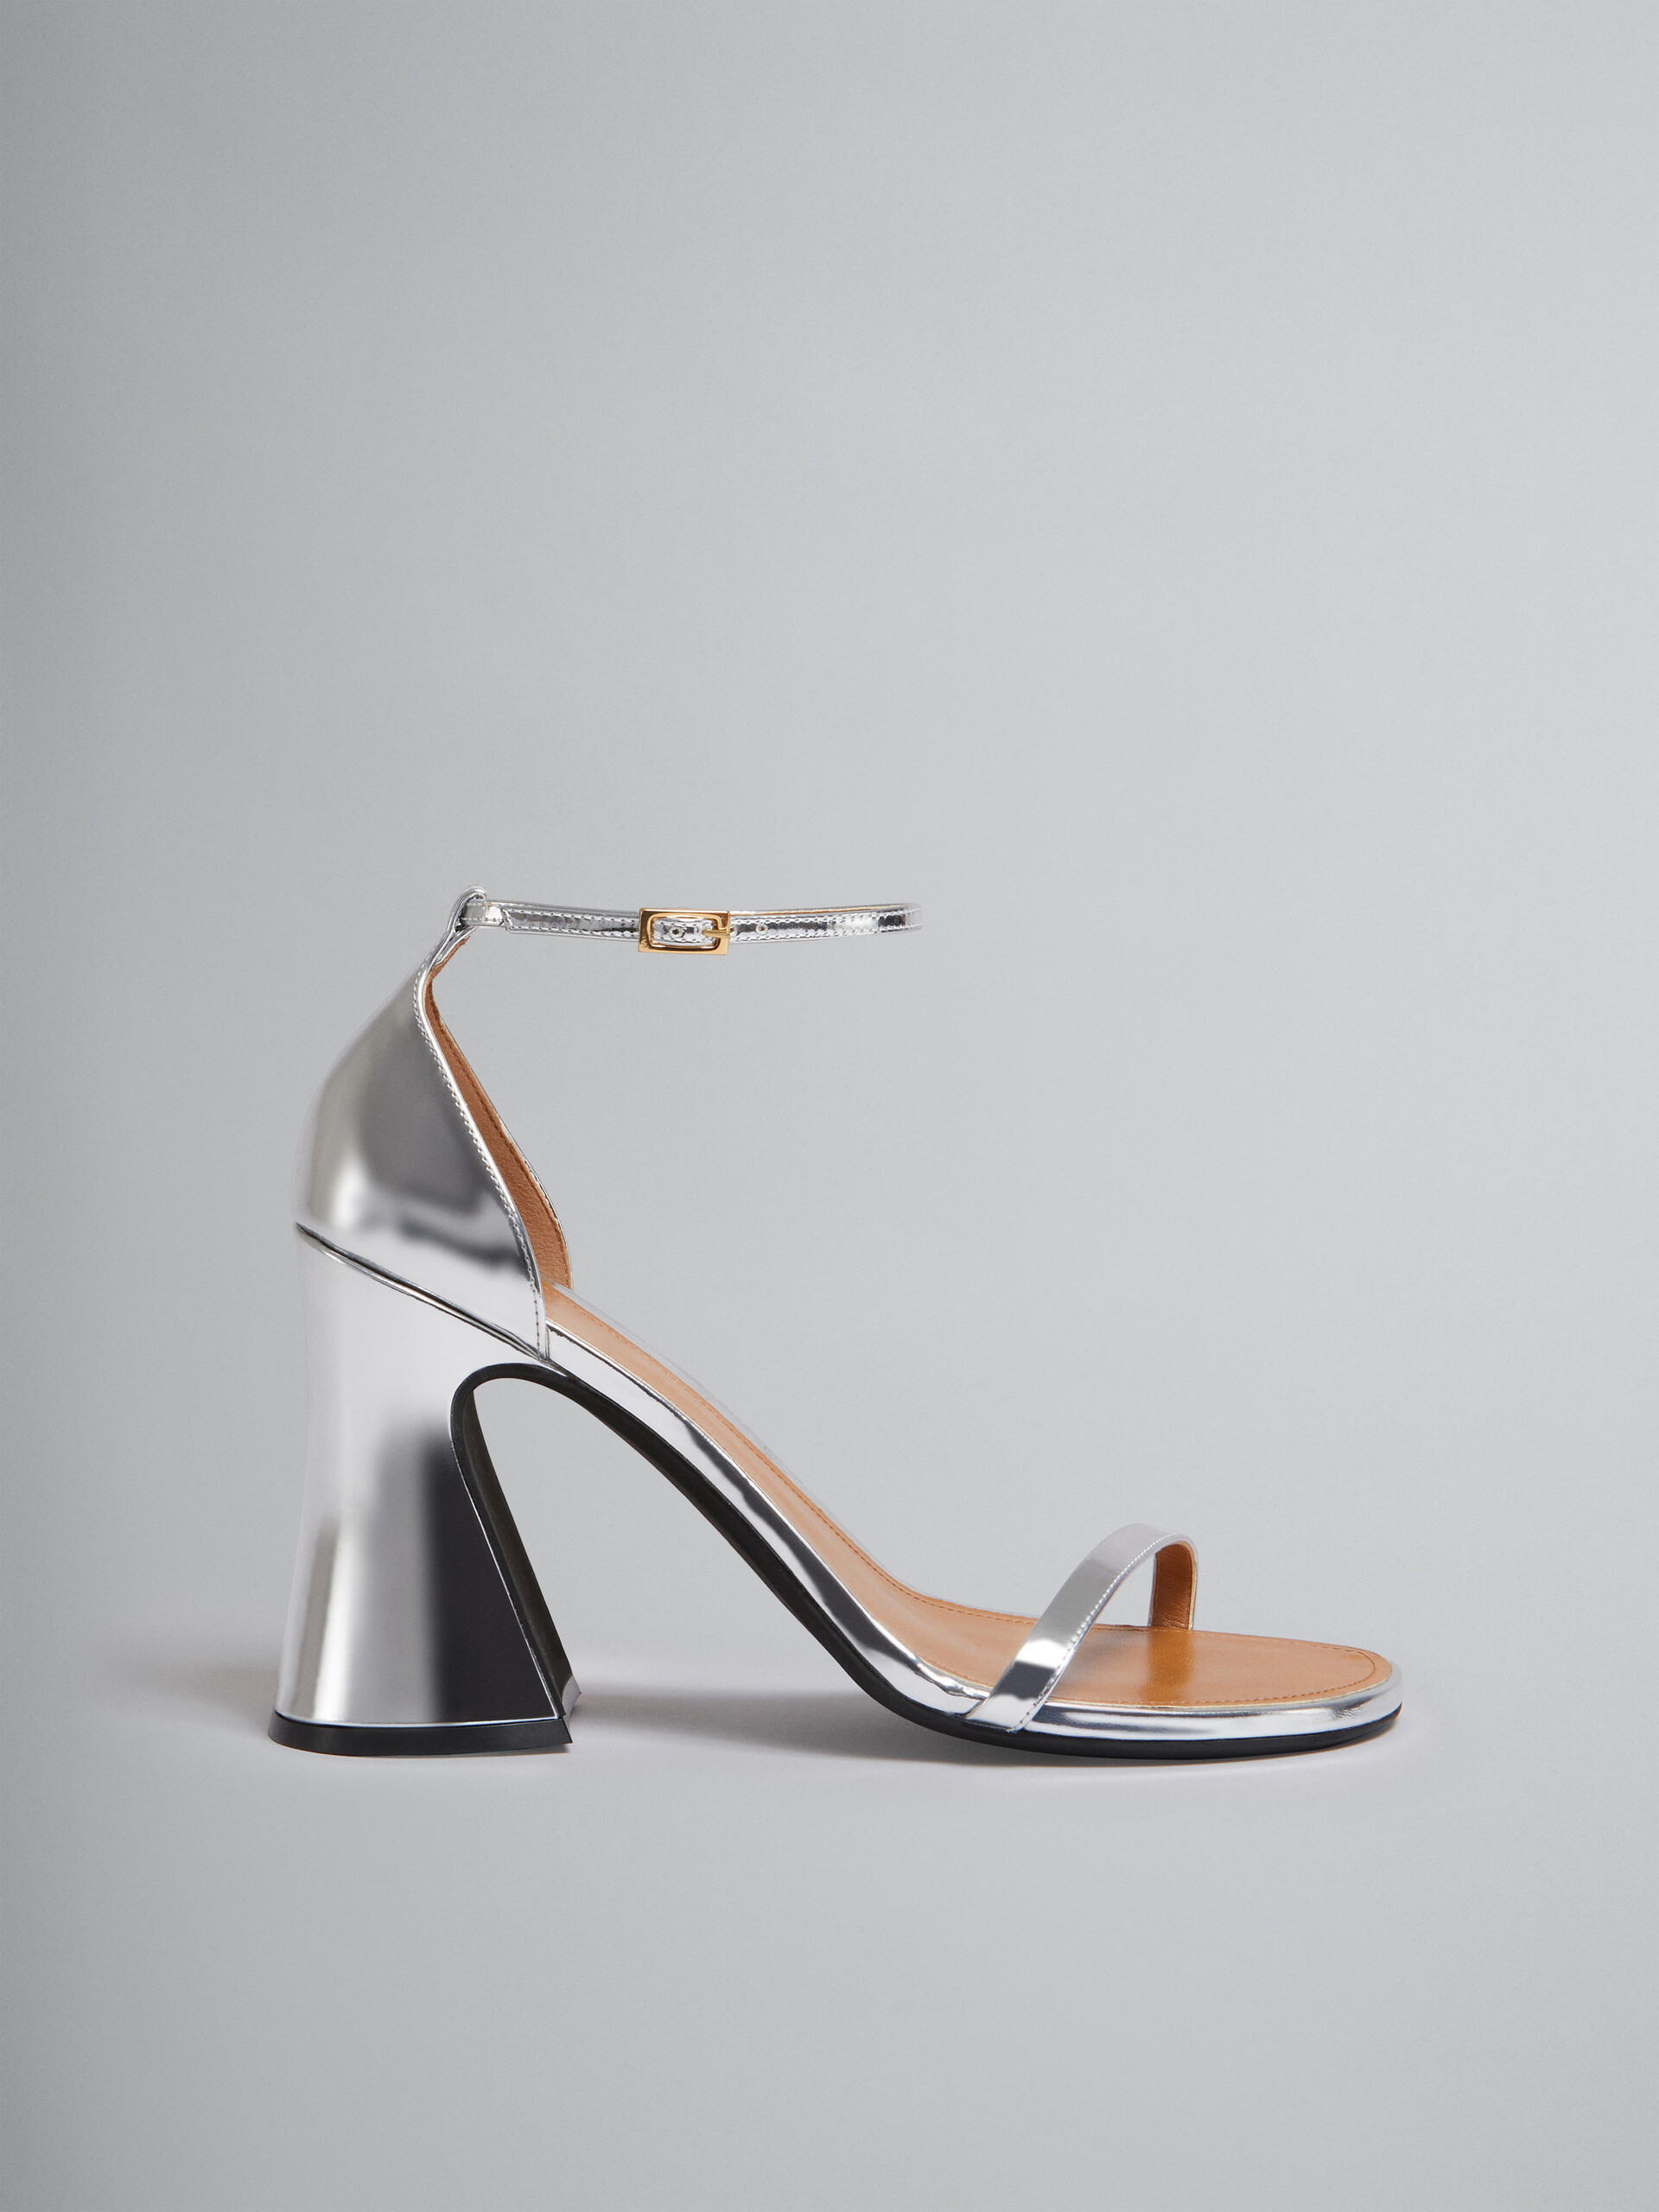 Silver mirrored leather sandal - Sandals - Image 1